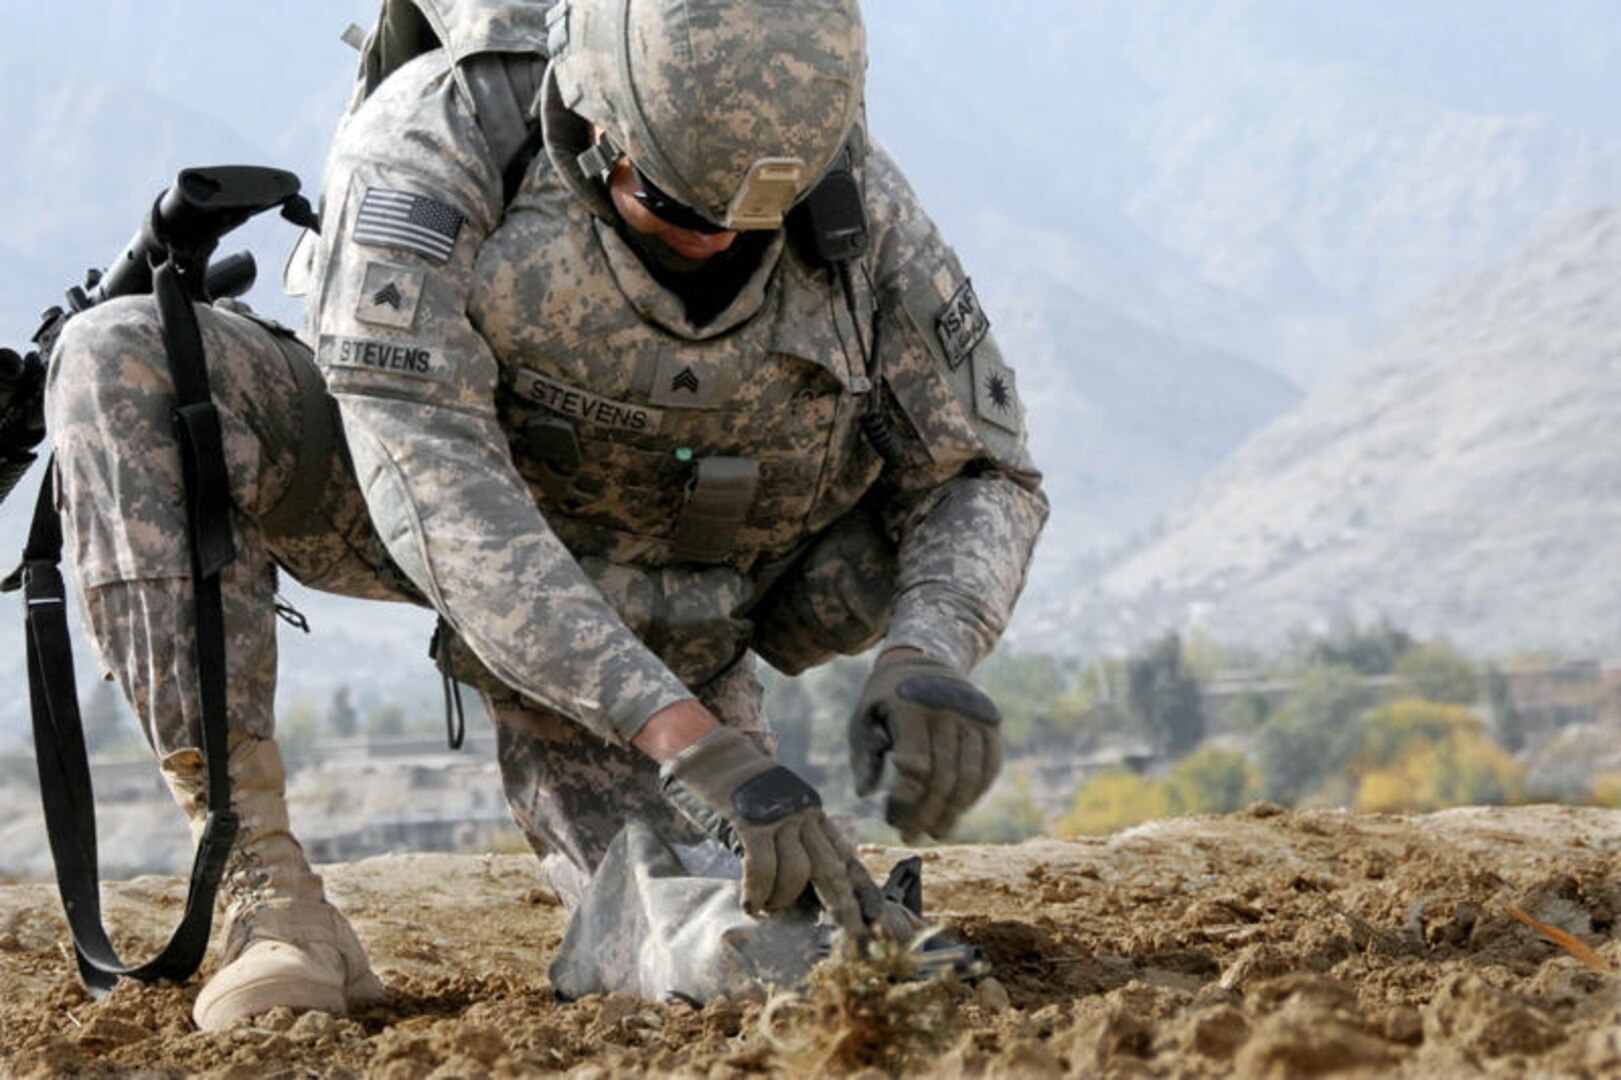 Sgt. Jason Stevens, a horticulturist with the California Army National Guard's 40th Infantry Division Agribusiness Development Team, gathers a soil sample from a field alongside the main road in Marawara, Afghanistan, on Nov. 23, 2009. The ADT stopped in Marawara to meet with local farmers about their crop output and farming in the area, as well as to gather soil samples to learn how crop production might be increased in the area.